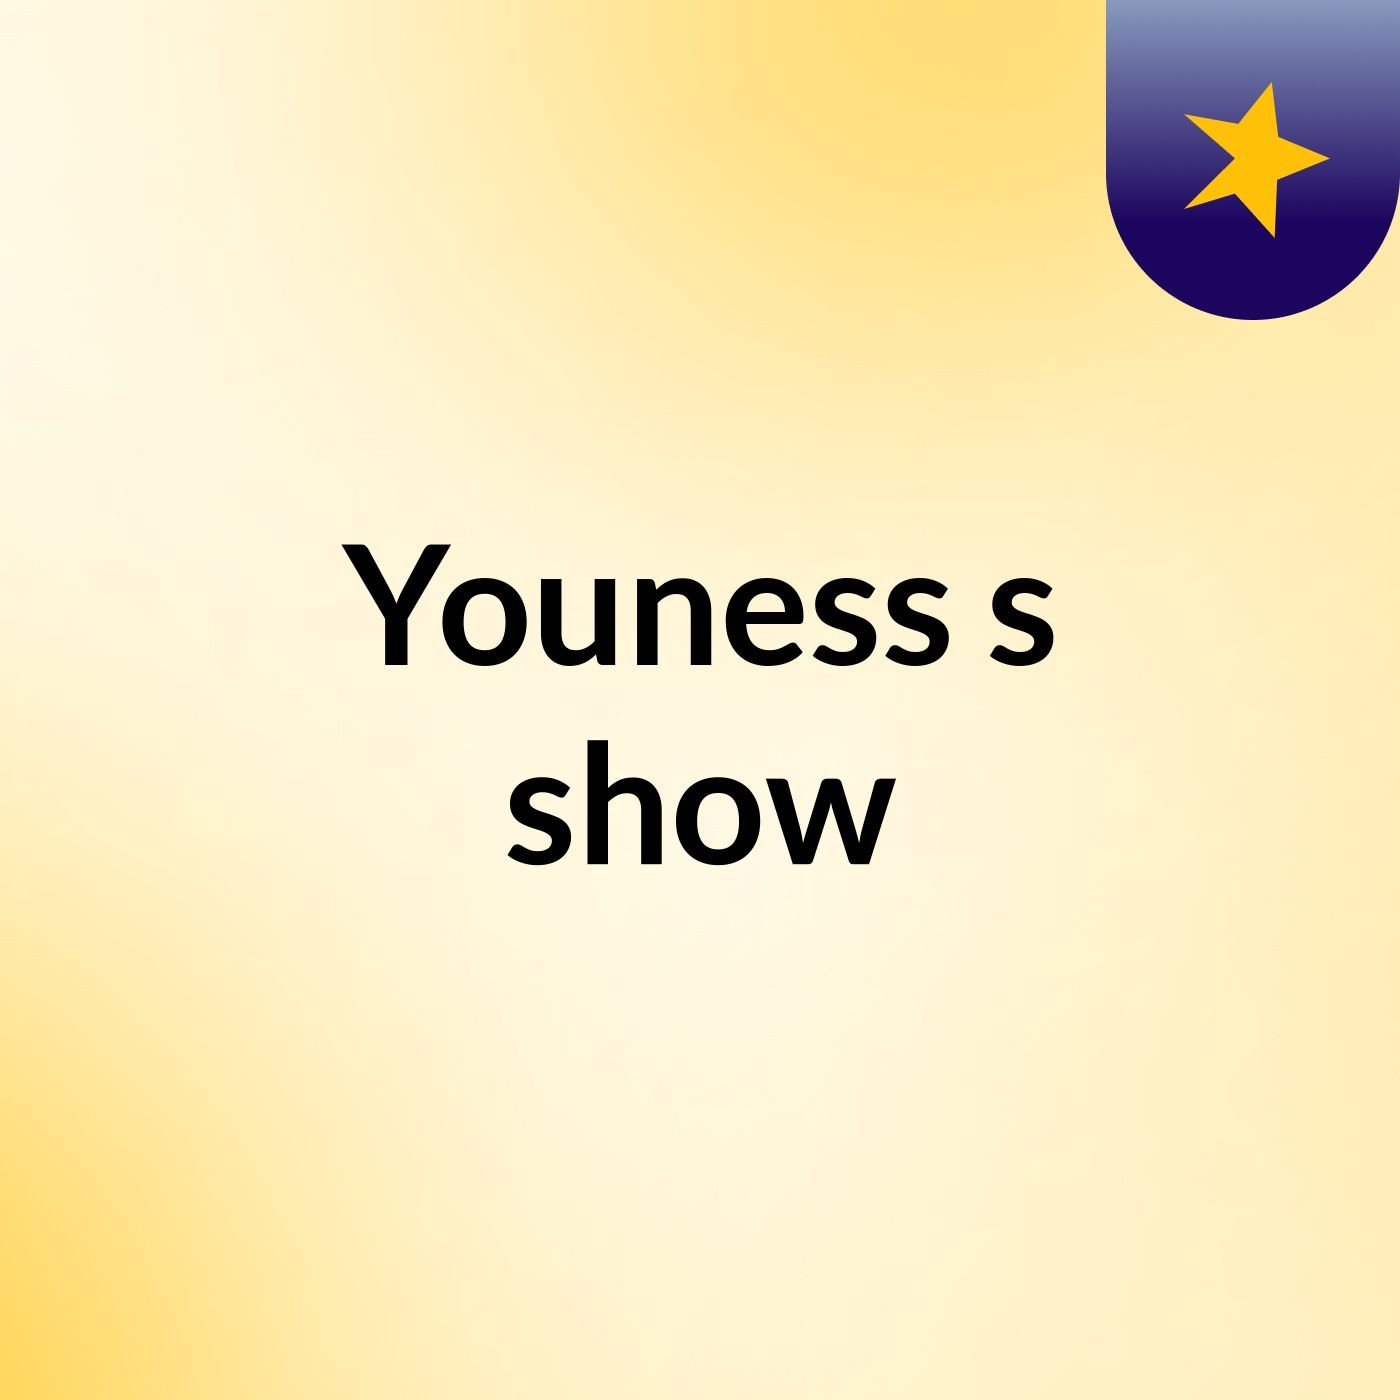 Youness's show